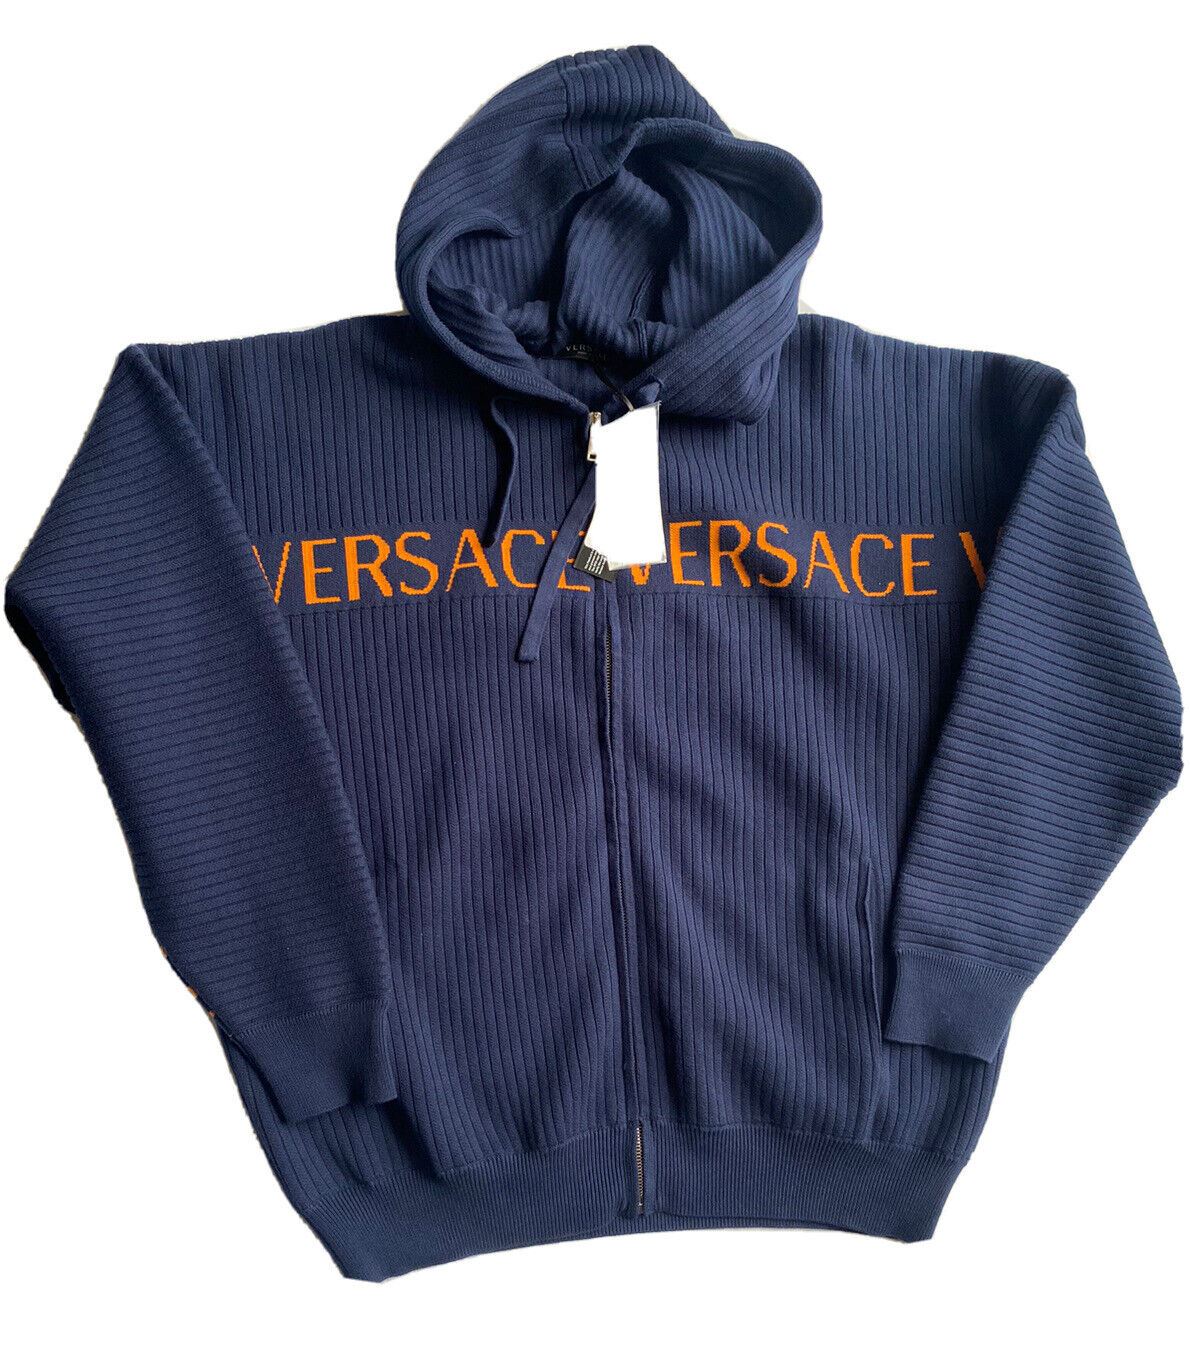 NWT $995 Versace Men's Knit Jacket with Hoodie Blue 48 US (58 Euro) A237551 IT